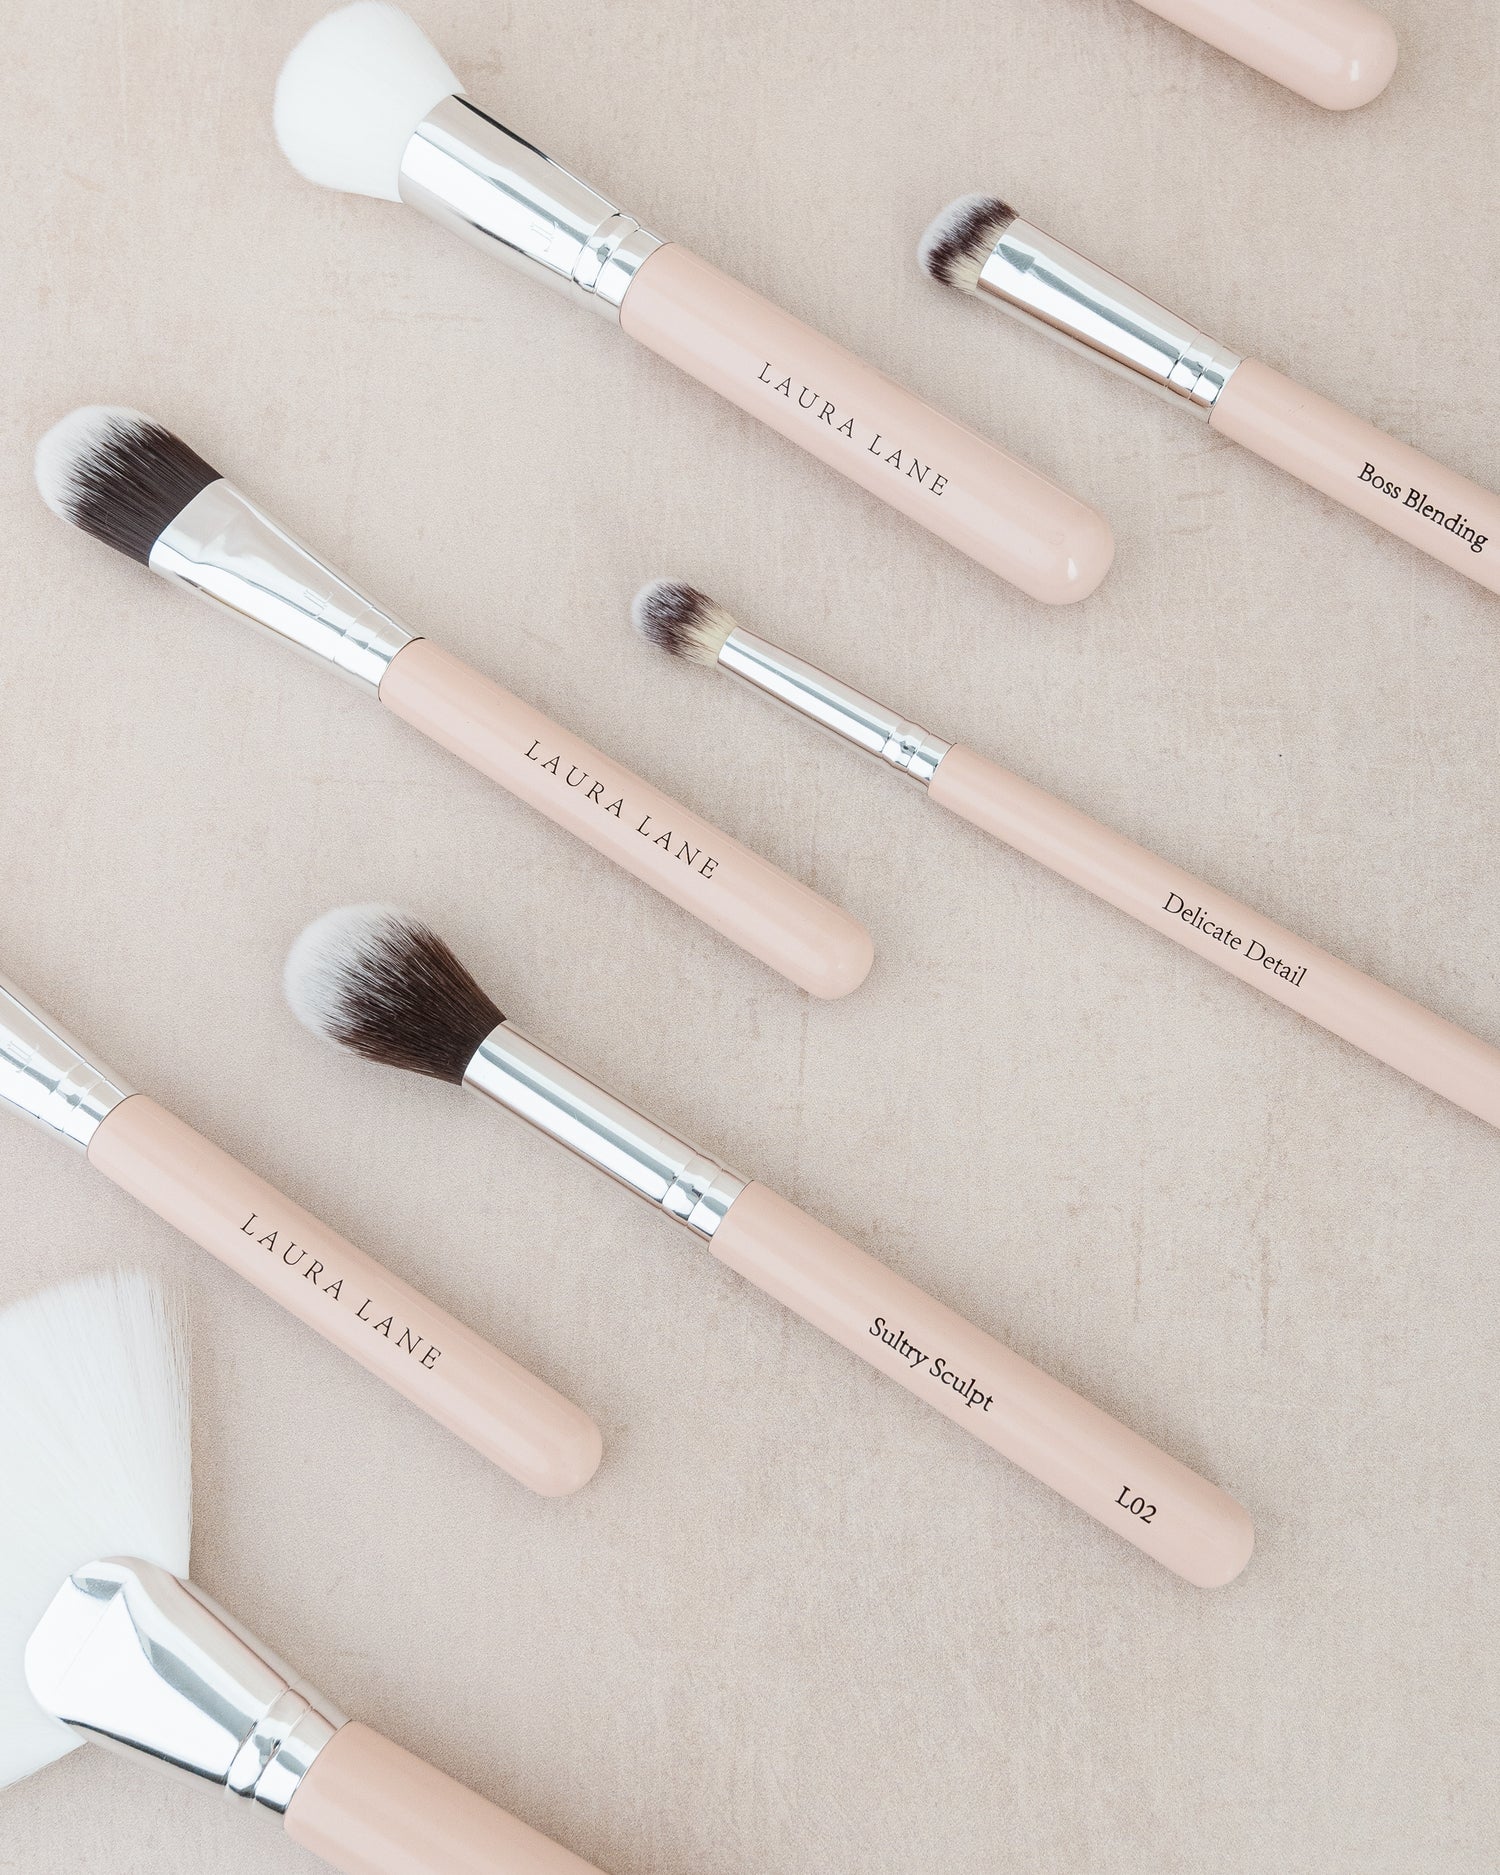 create-everyday-natural-contouring-makeup-looks-with-laura-lane-brushes